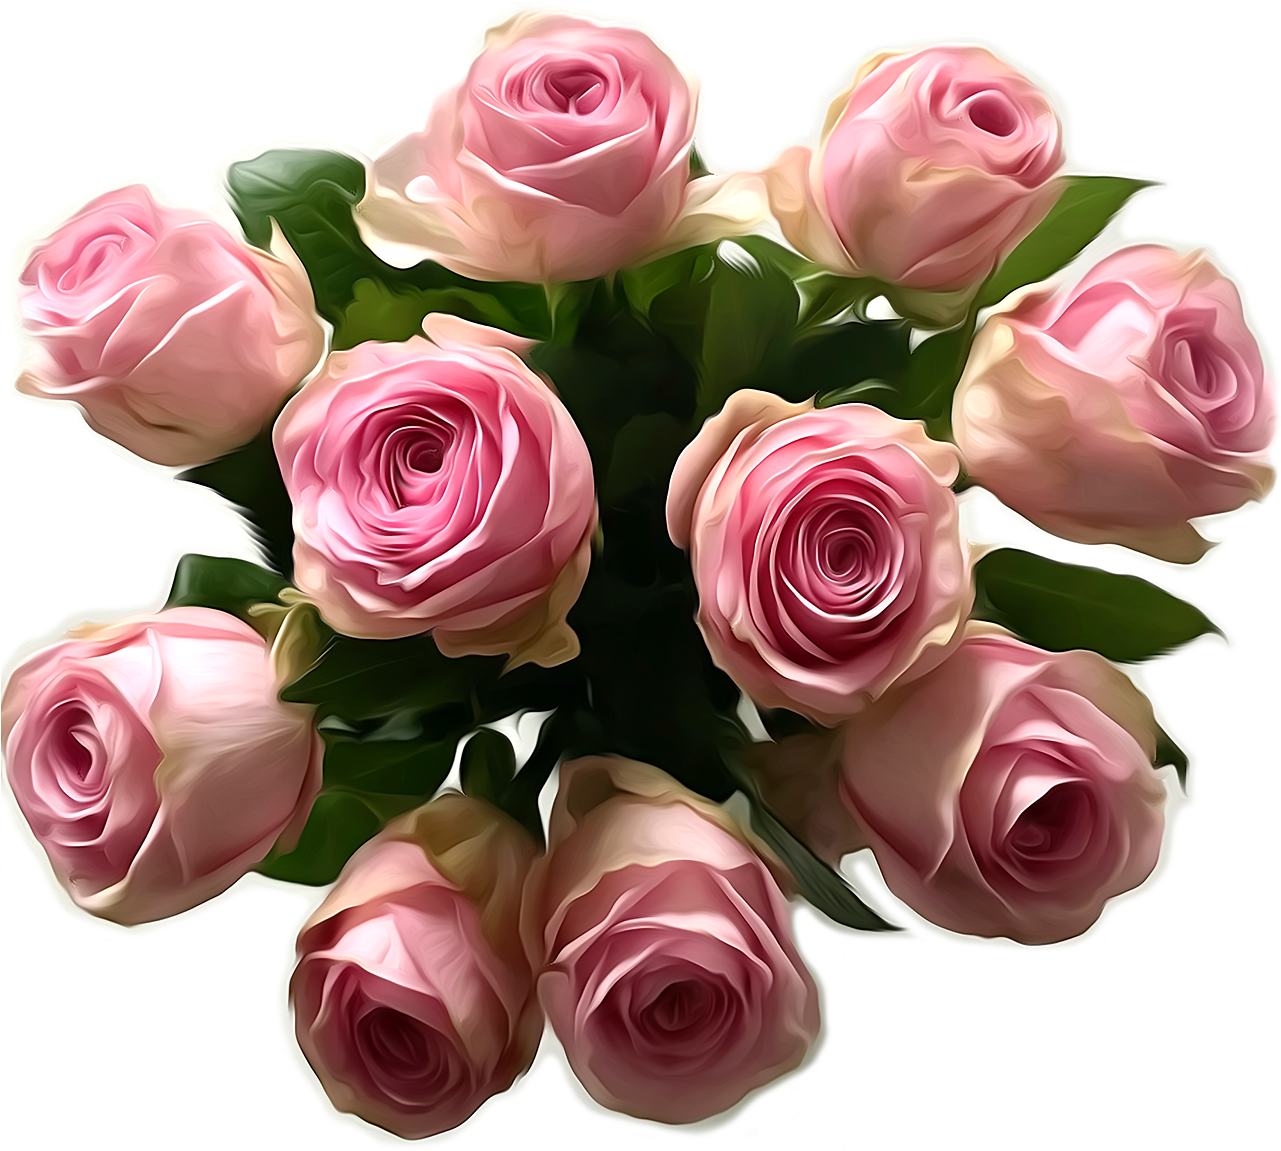 A Bouquet Of Pink Roses